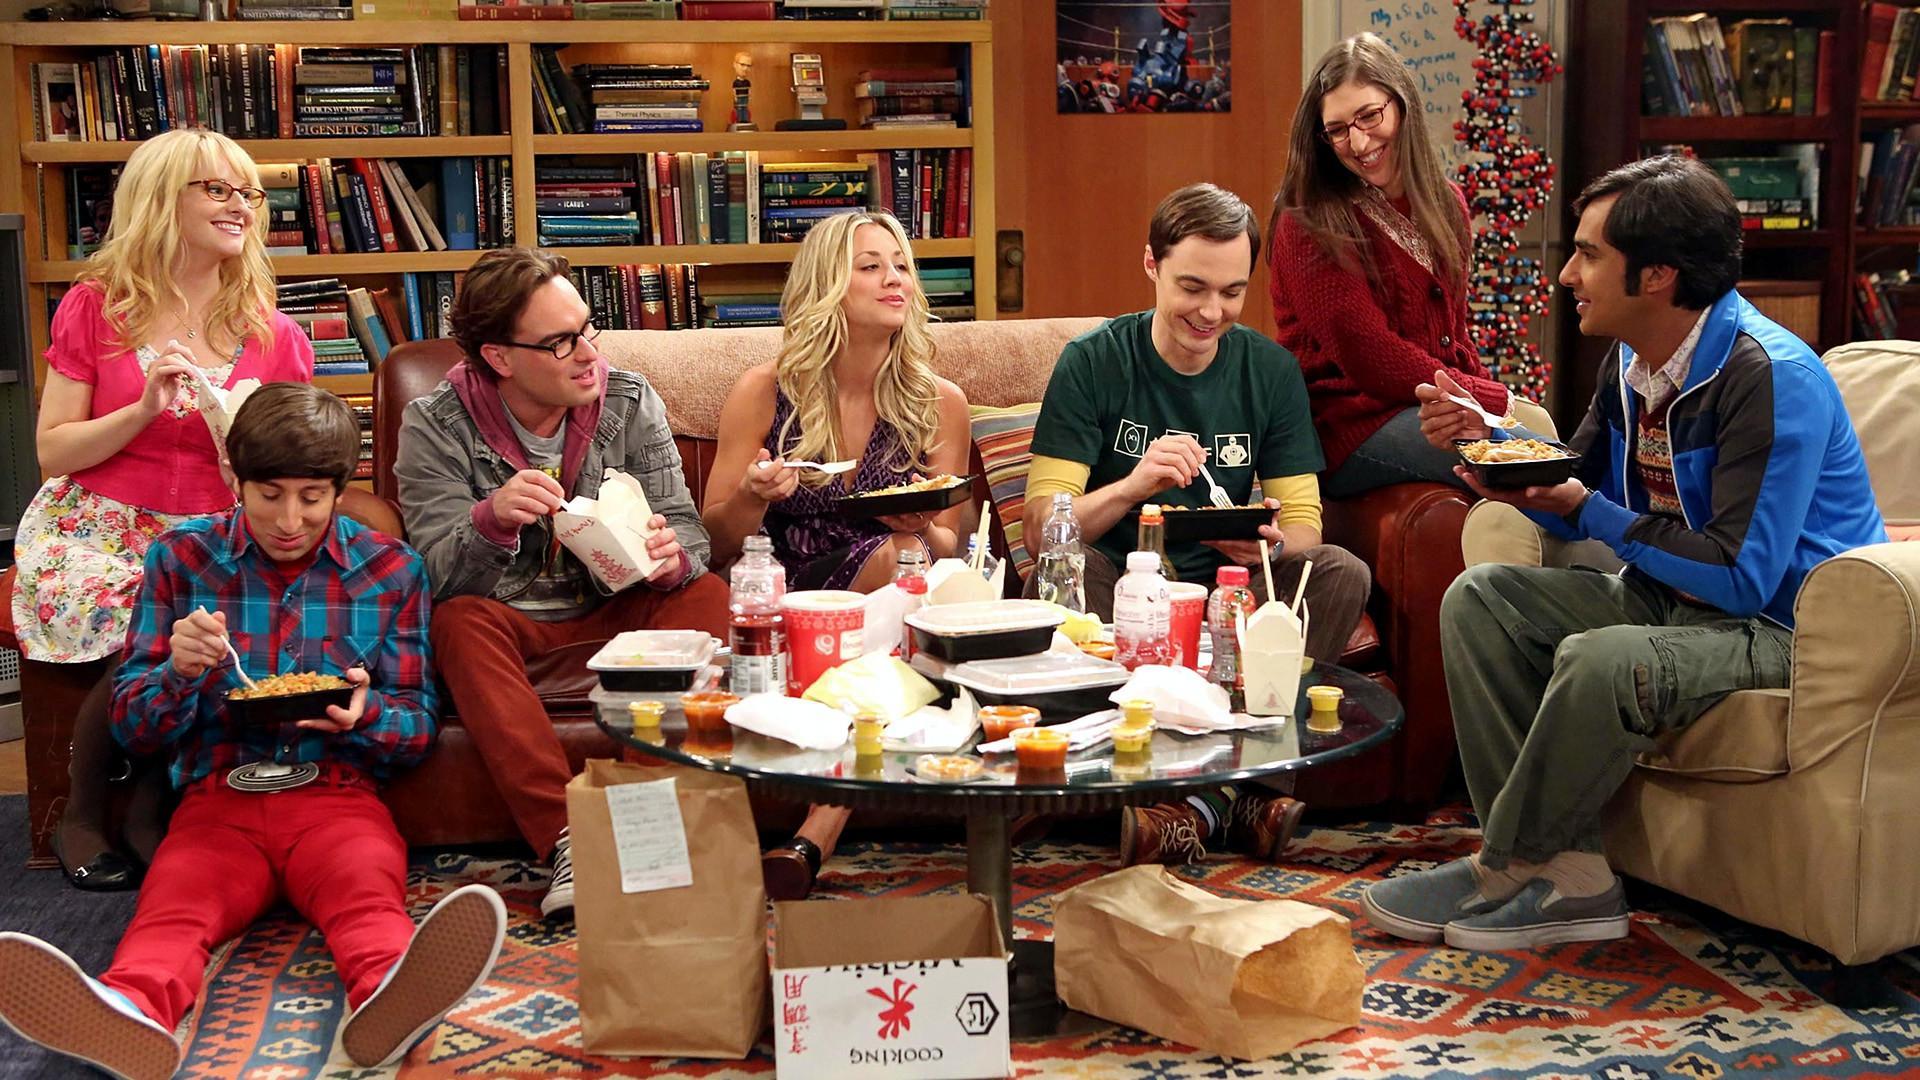 The recently finished Big Bang Theory has already been acquired for WarnerMedia’s yet-to-be-launched HBO Max service